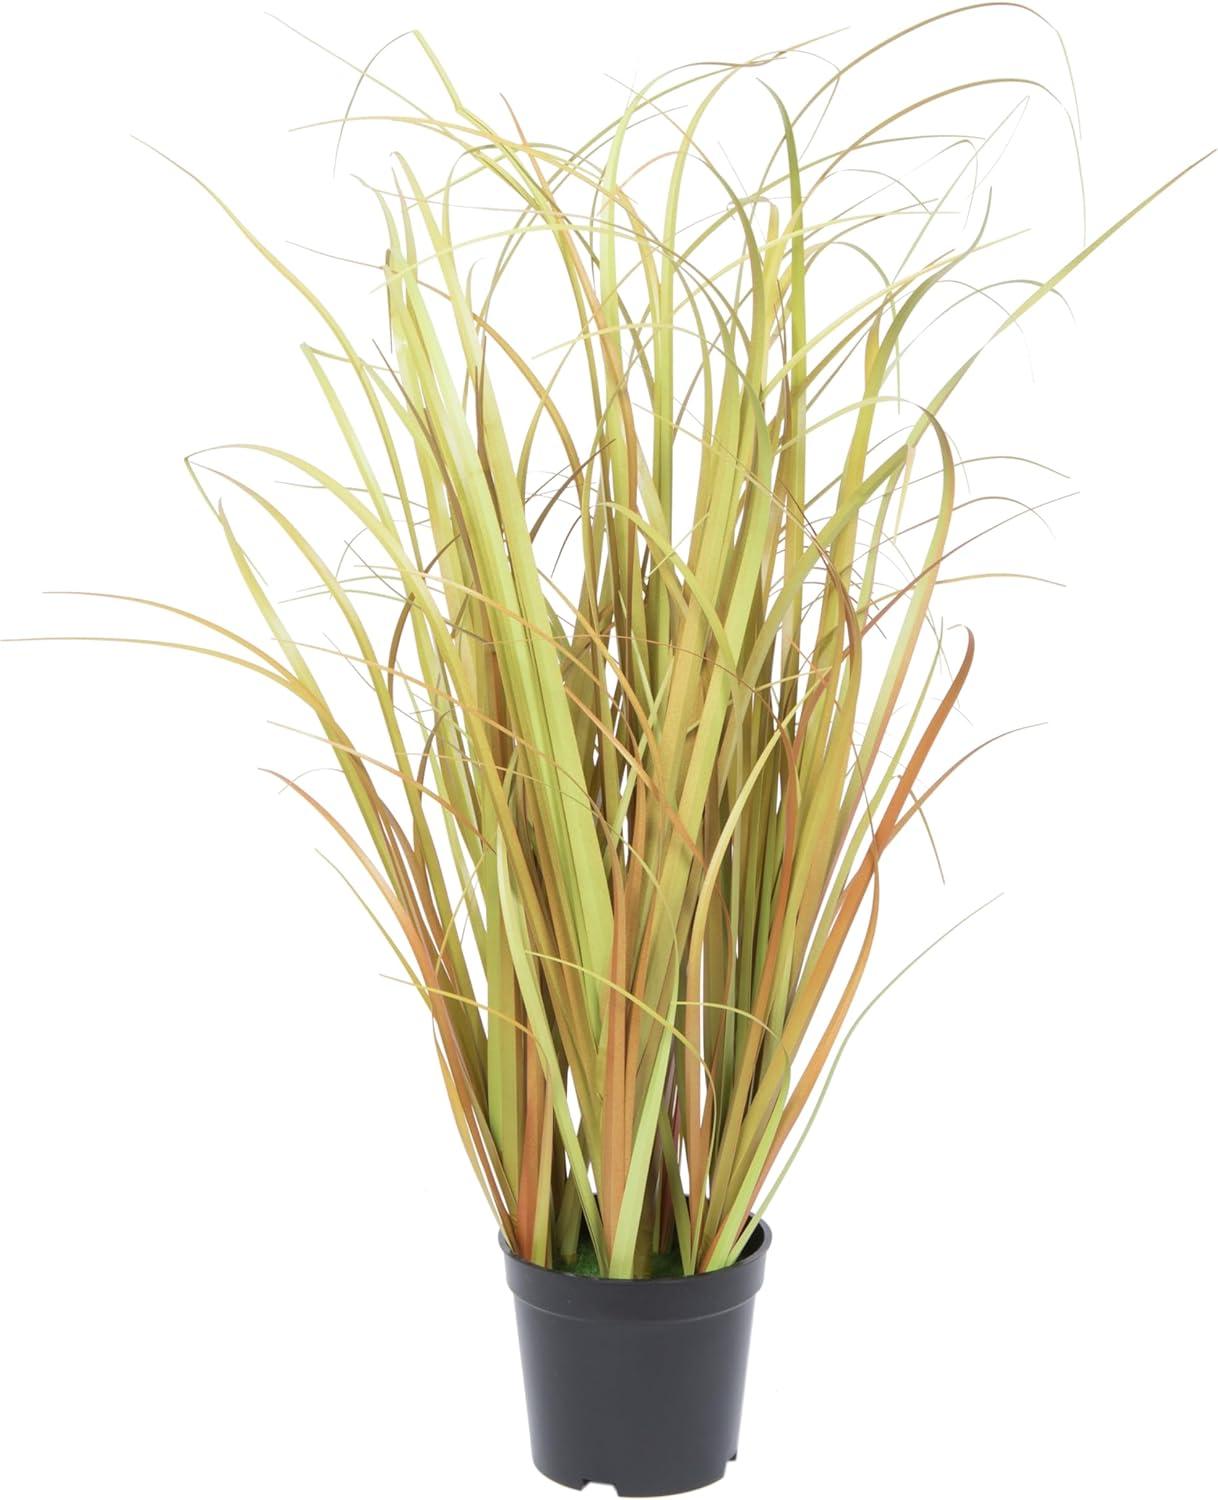 Autumnal Charm 24" Mixed Brown PVC Grass in Black Pot